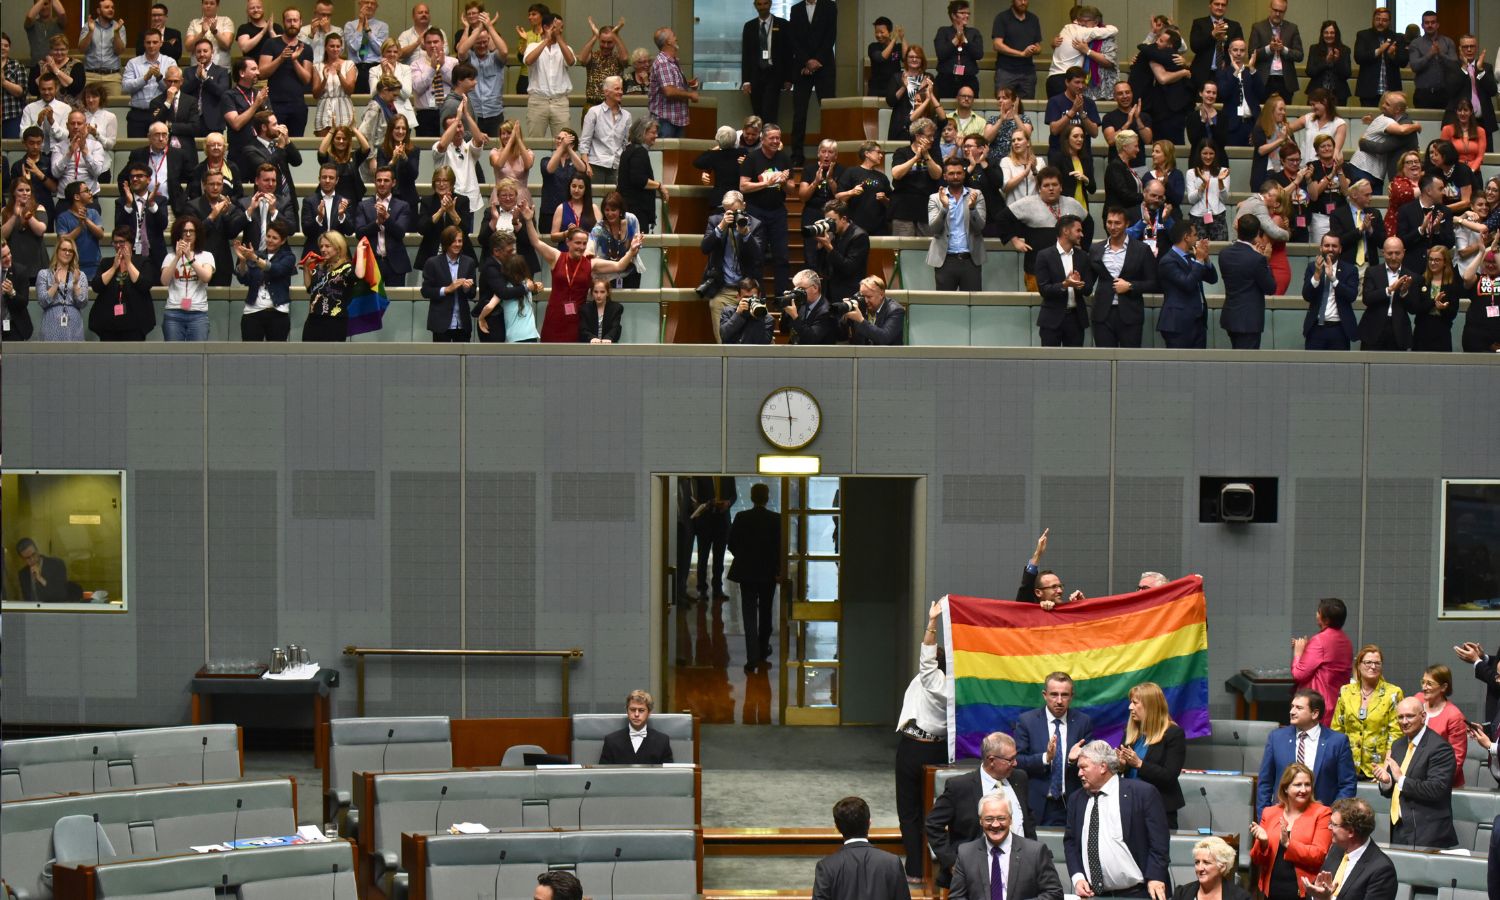 An image of Parliament in ACT when gay marriage was legalised